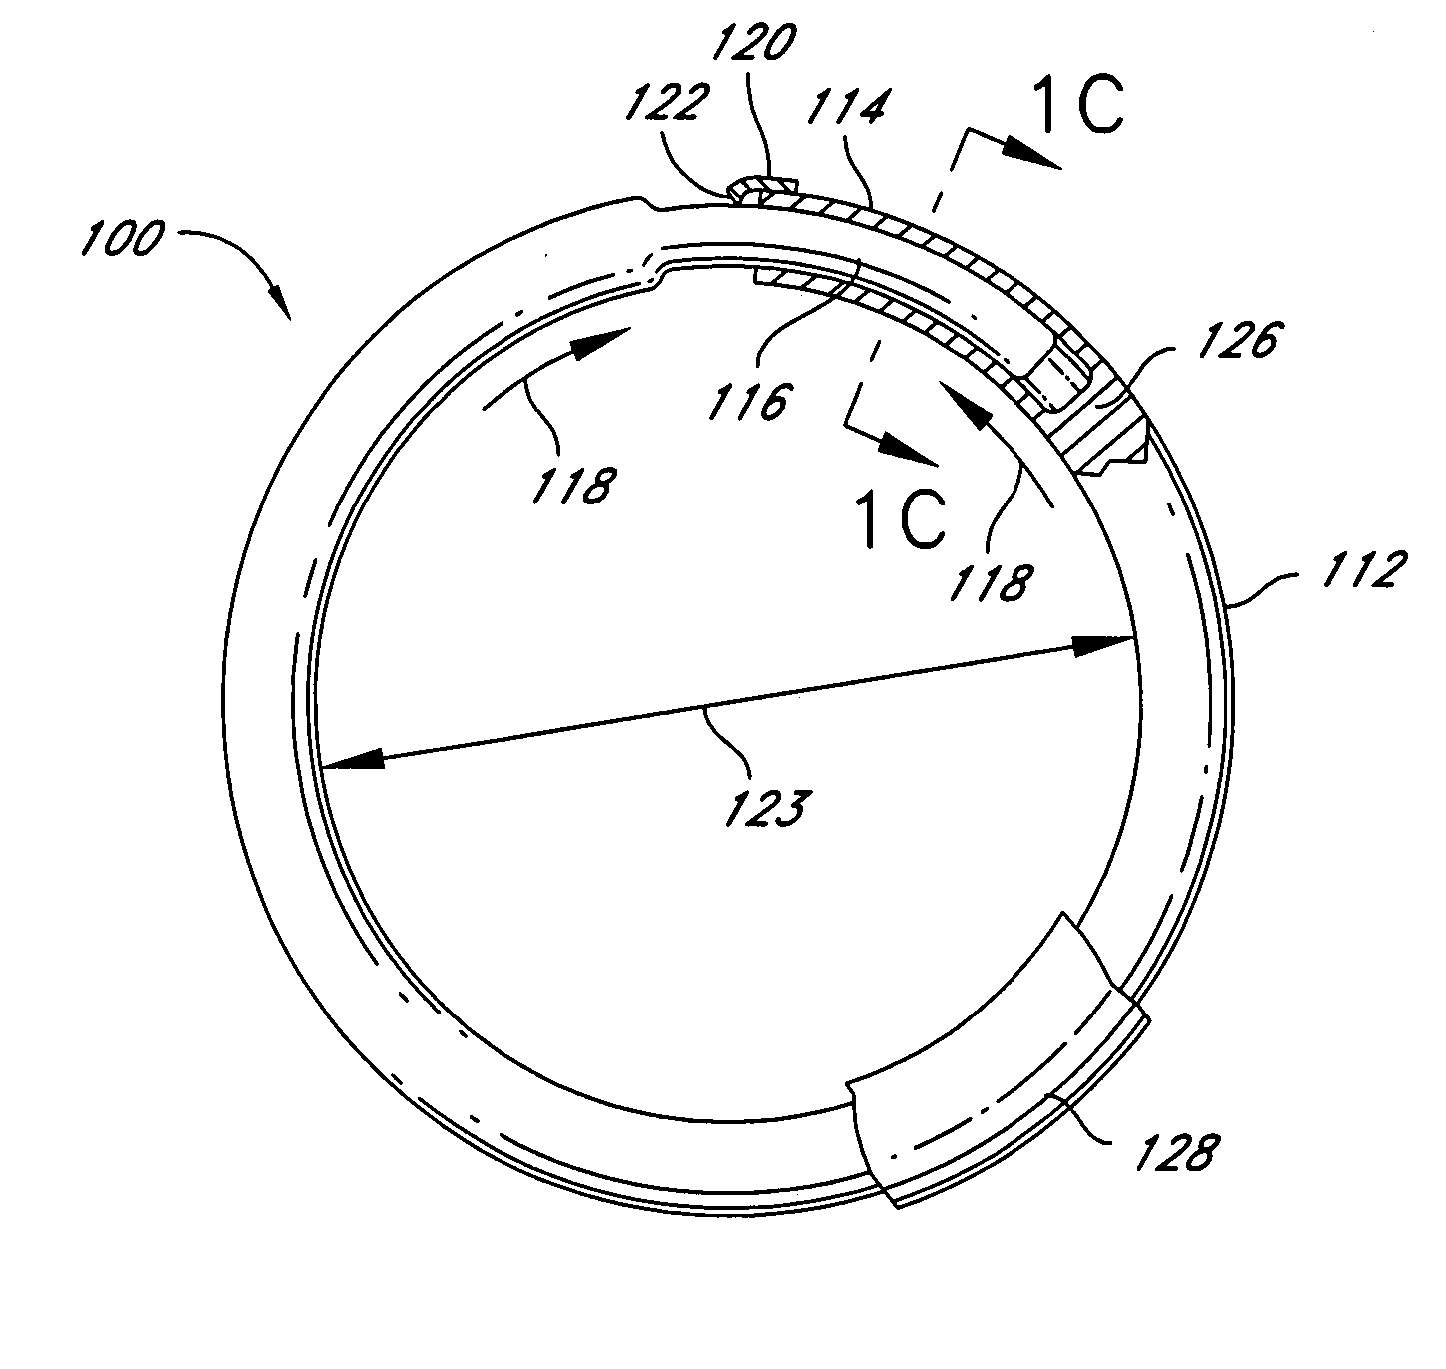 Intraoperative and post-operative adjustment of an annuloplasty ring